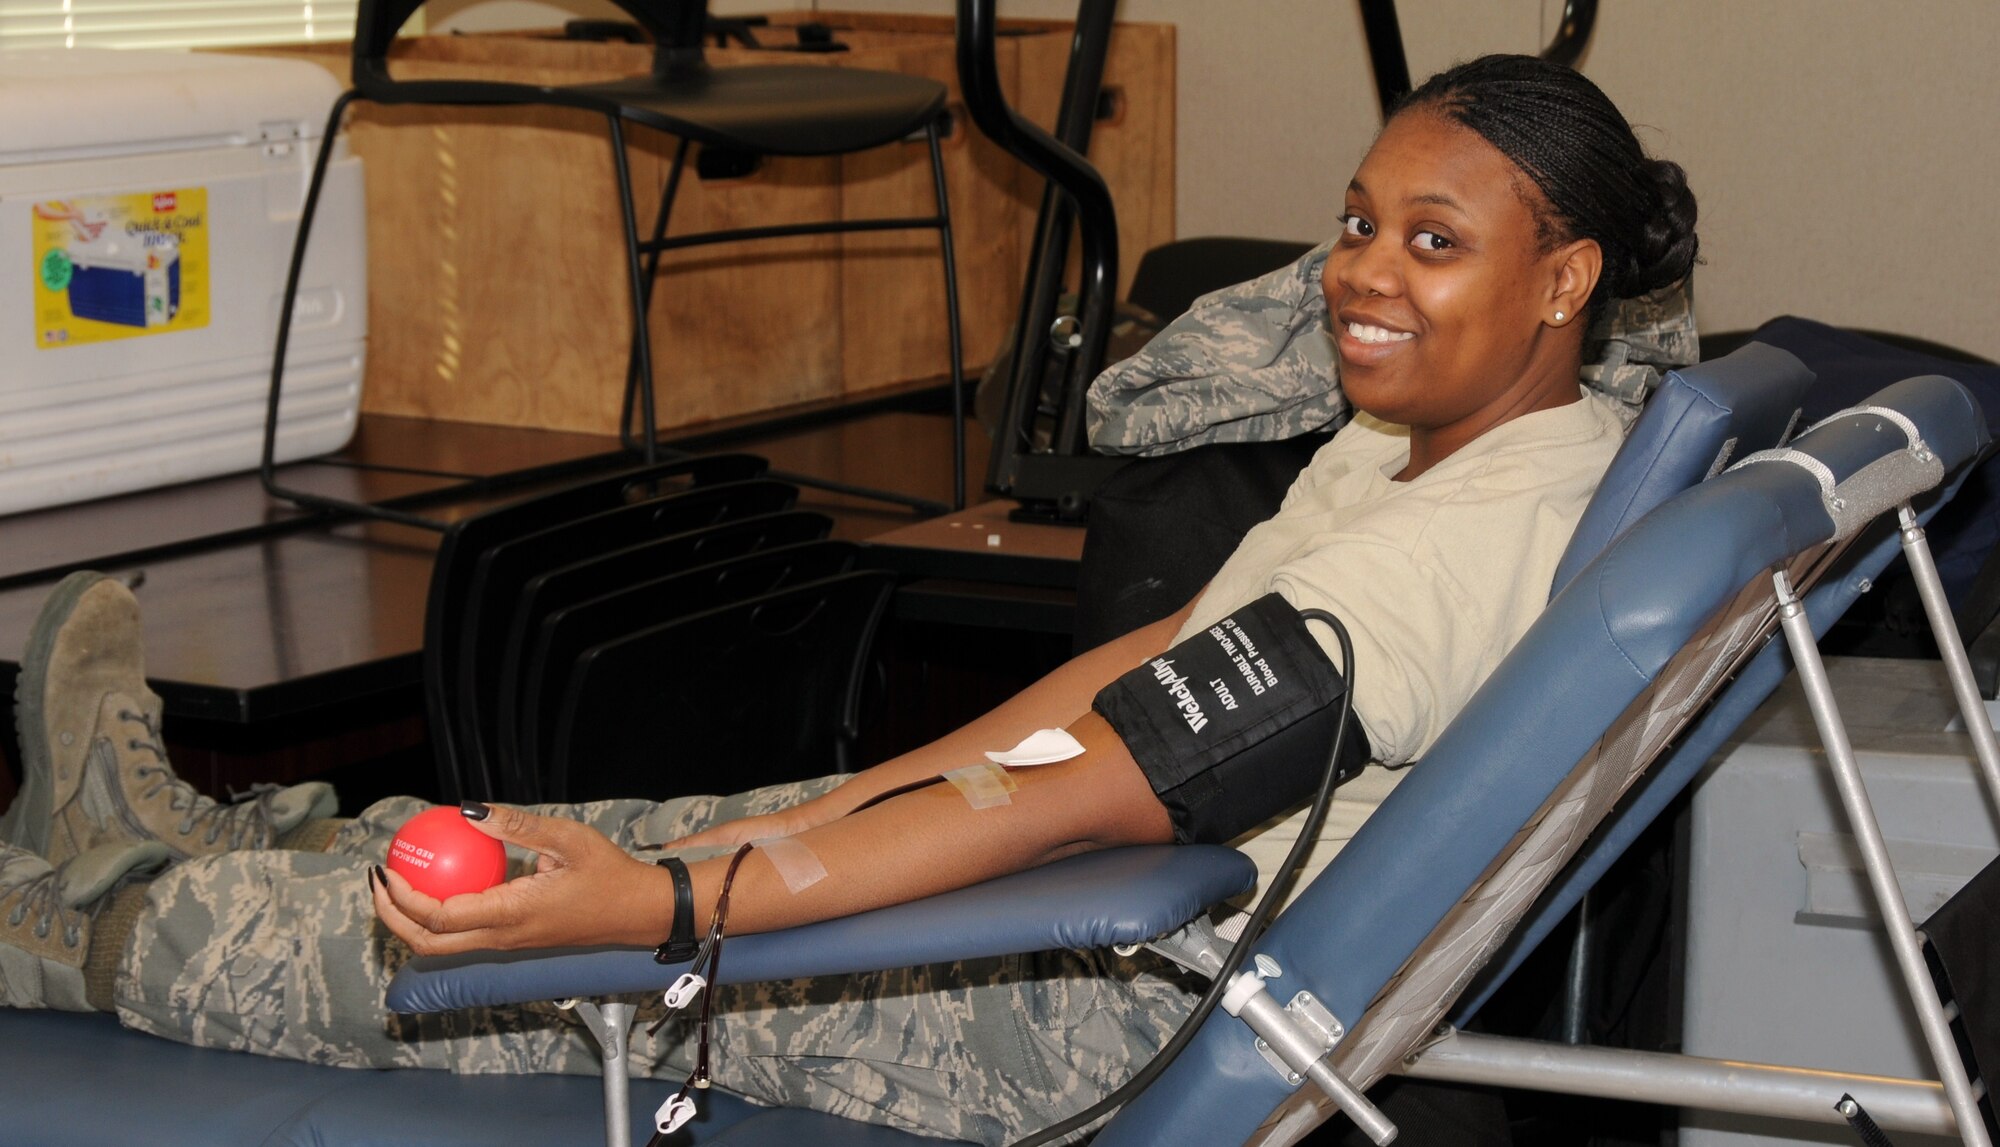 Technical Sergeant Sherveta Wright, Knowledge Operations Manager for the 164th Airlift Wing, puts on a brave smile as she donates blood during the base's semi-annual blood drive.